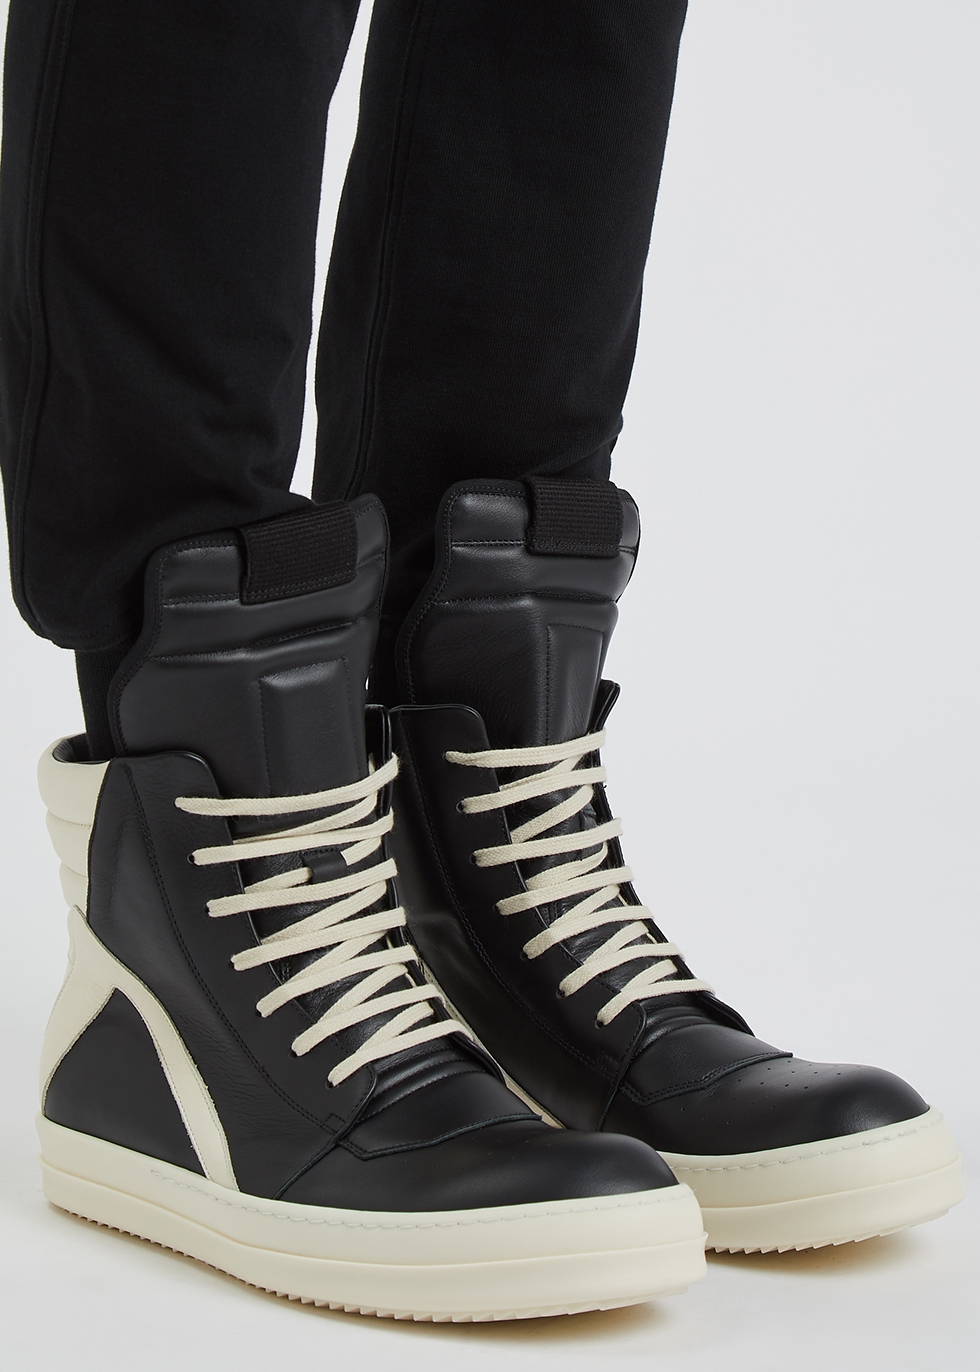 black high top sneakers leather